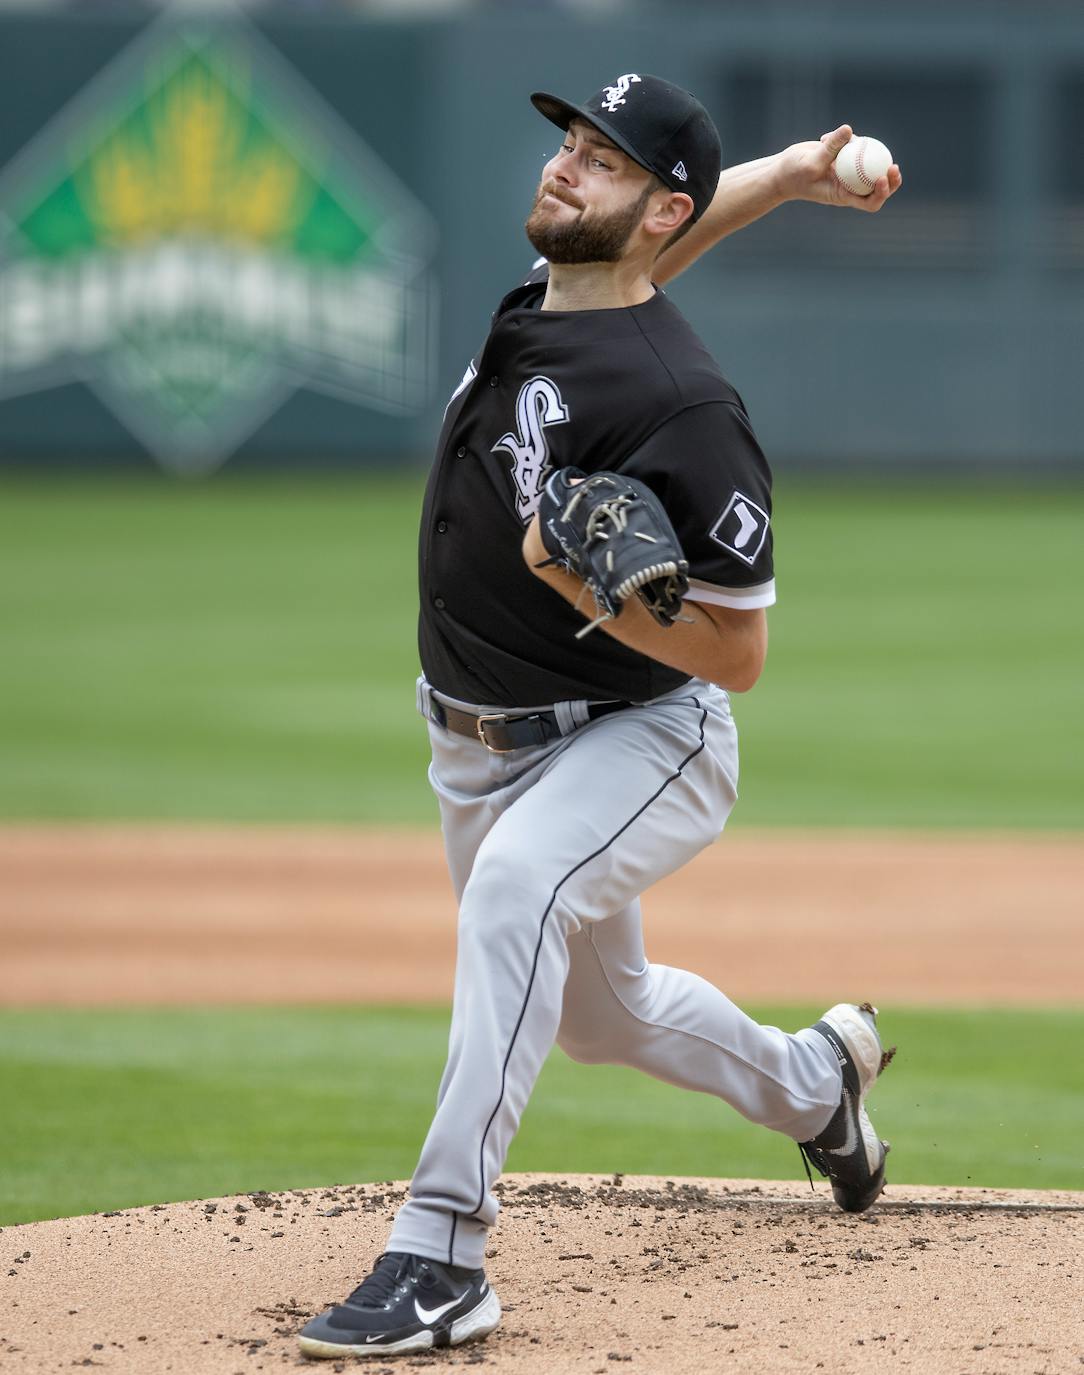 Chicago White Sox: Lucas Giolito takes the mound in opener